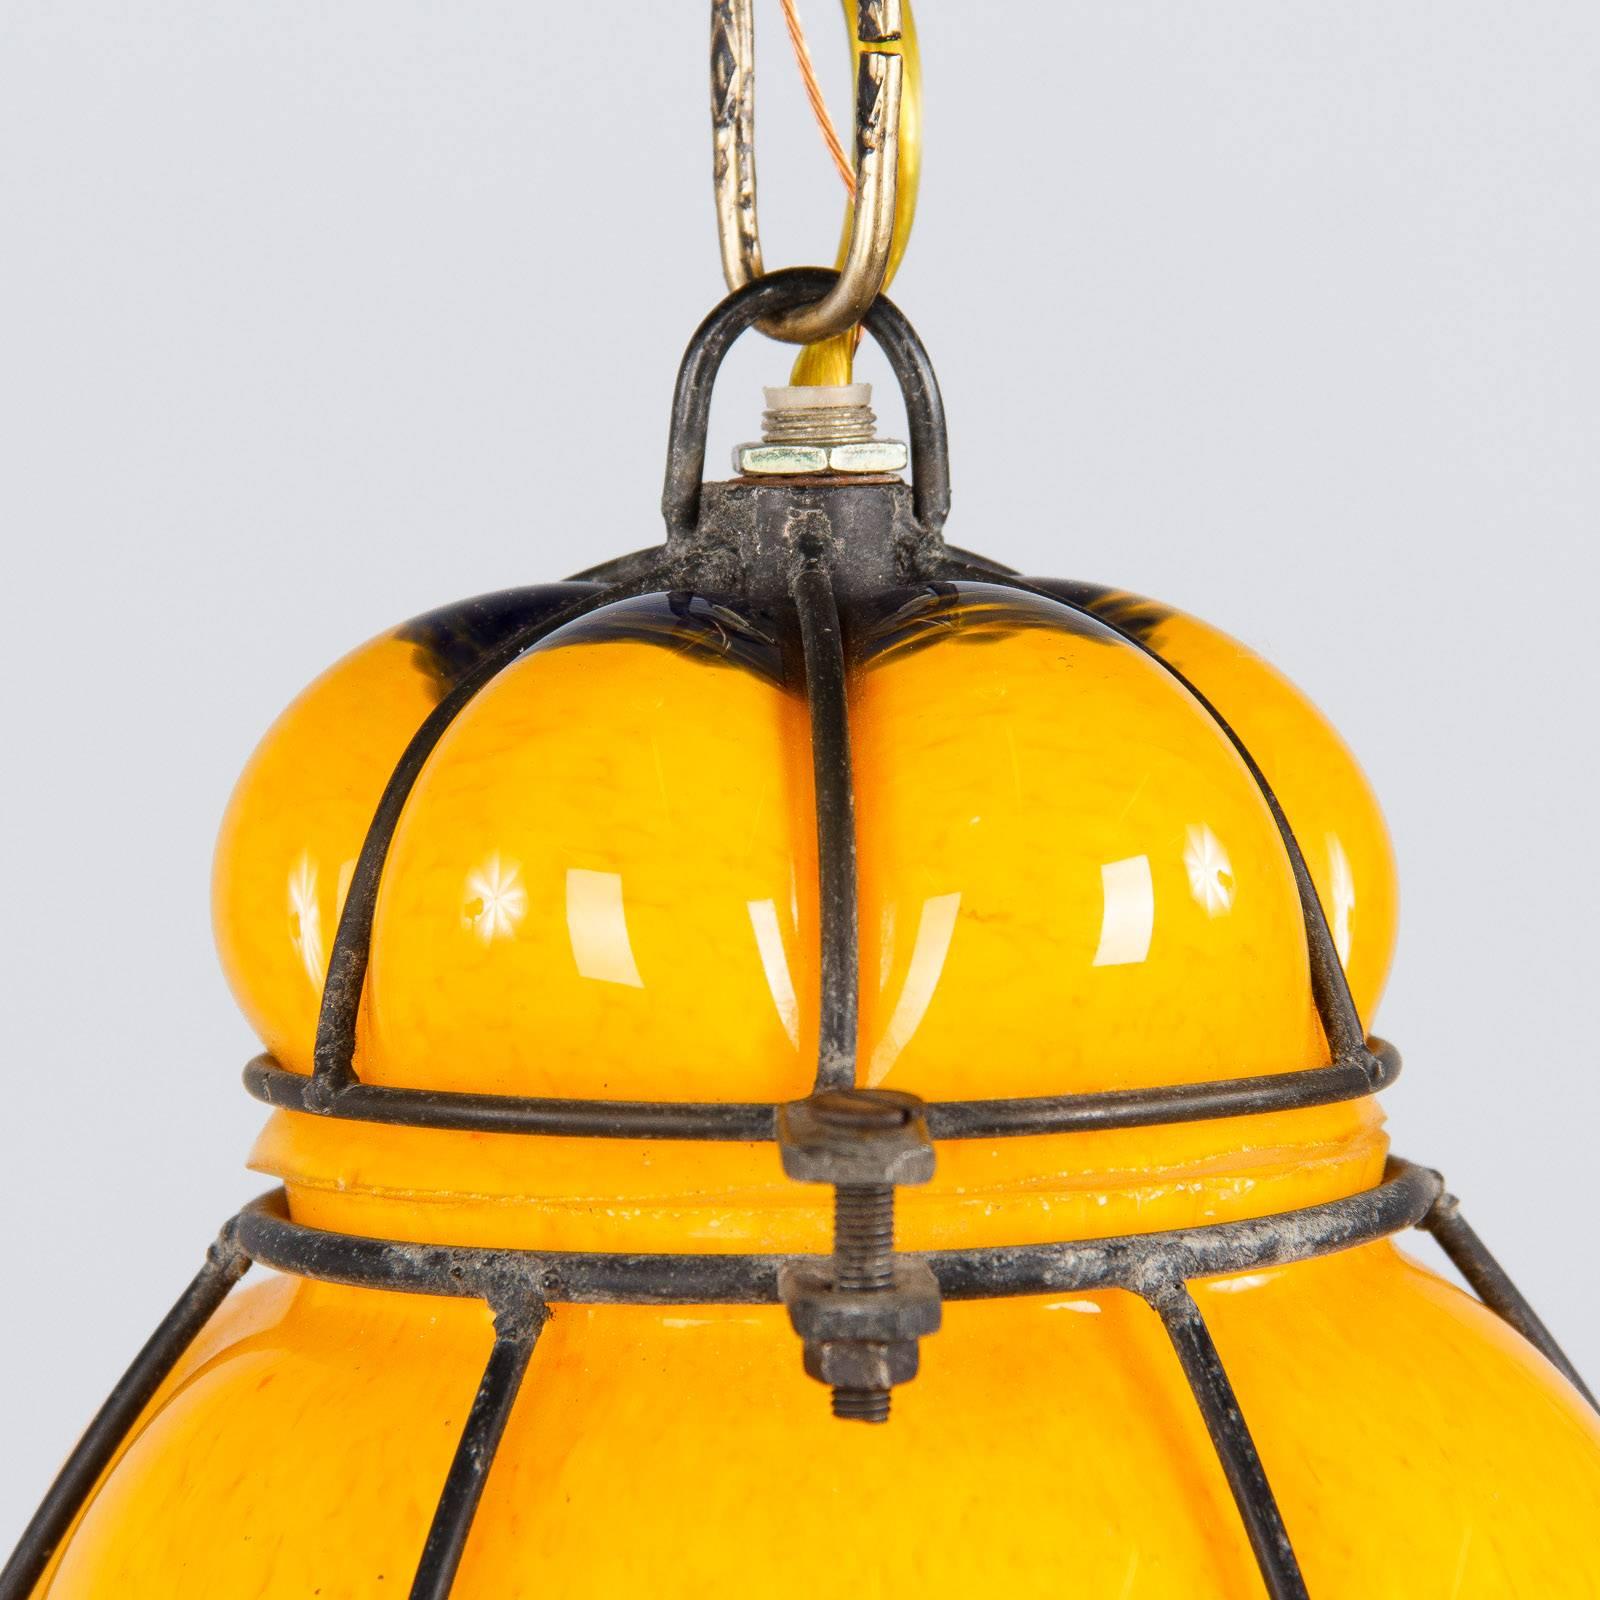 A colorful Mid-Century caged Murano glass pendant hanging lantern. Opaque yellow and dark green handblown glass with red/orange flecks, caged in a black metal. Top unhinges to place or change single medium size bulb (up to 100 watts). Chain and